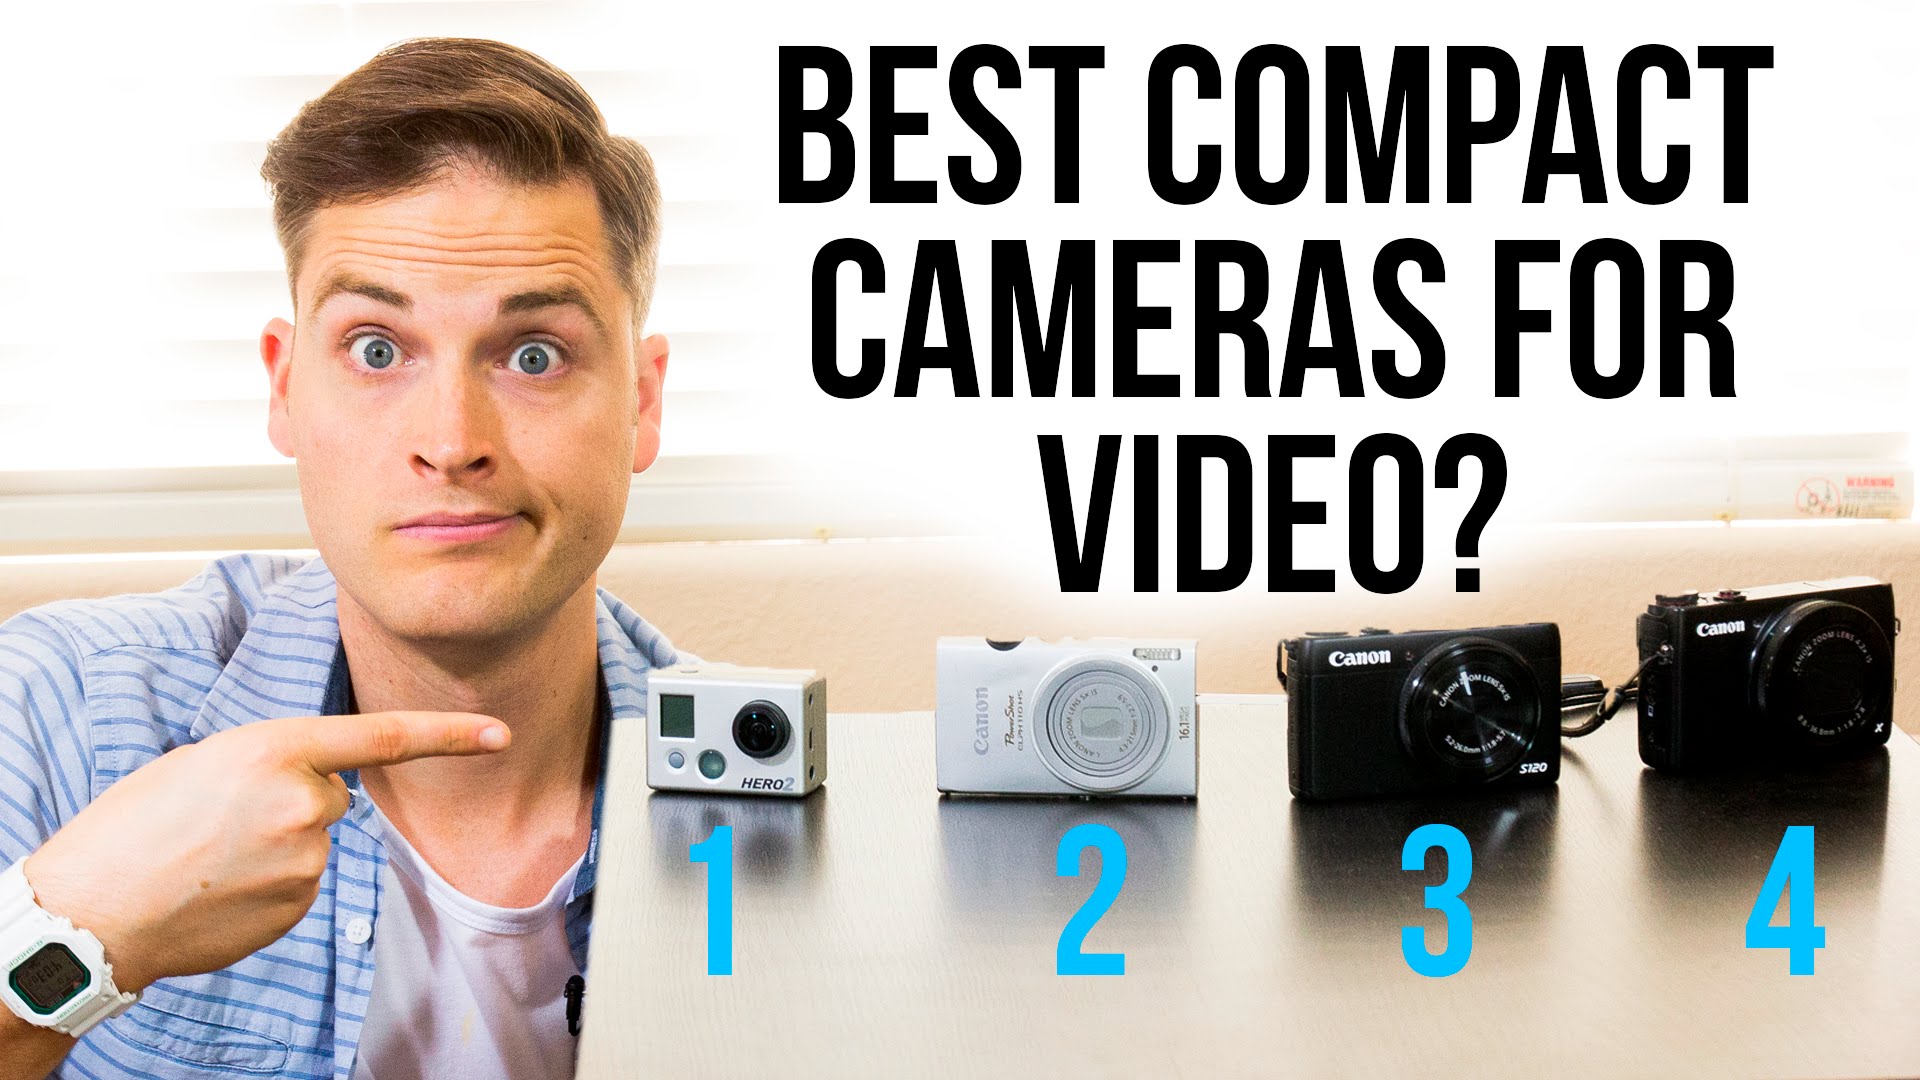 Best Compact Camera For Video